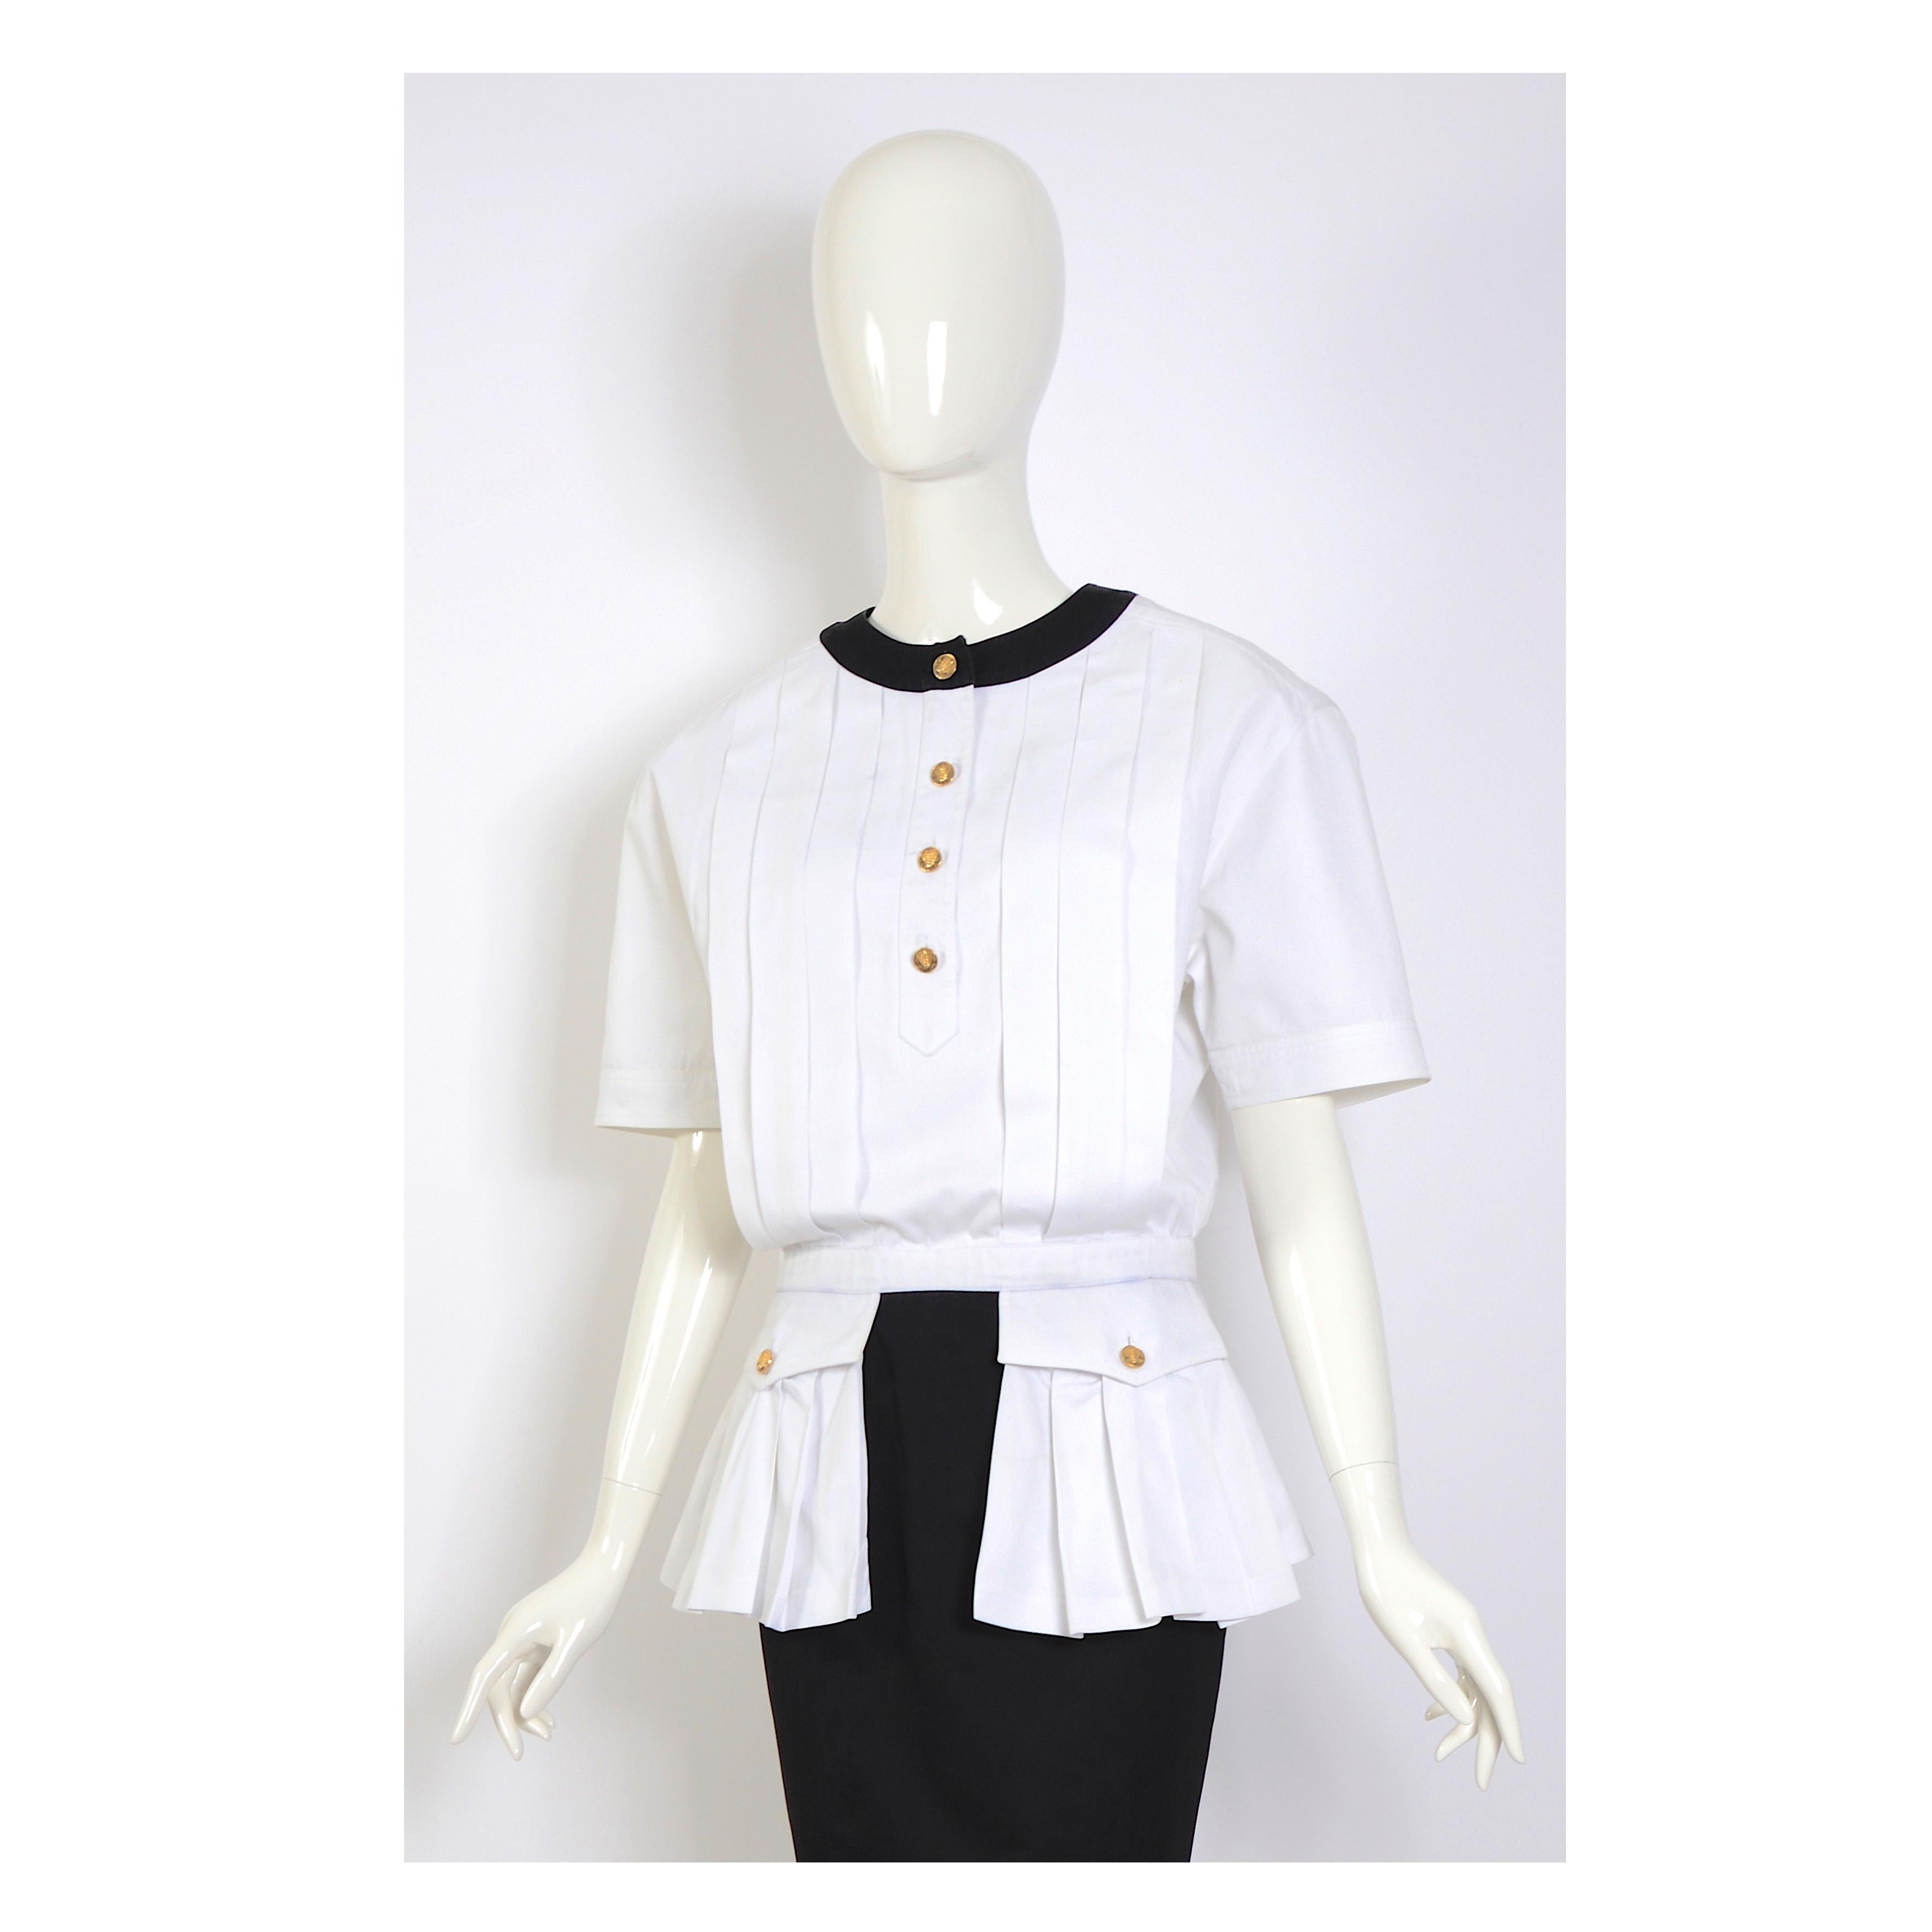 Chanel dress in white & black cotton, round neck with golden buttons, short sleeves, front pleats, and pleated pockets with flap and button.
The dress's large shoulder pads have been removed, but it's possible to replace them if desired. The dress